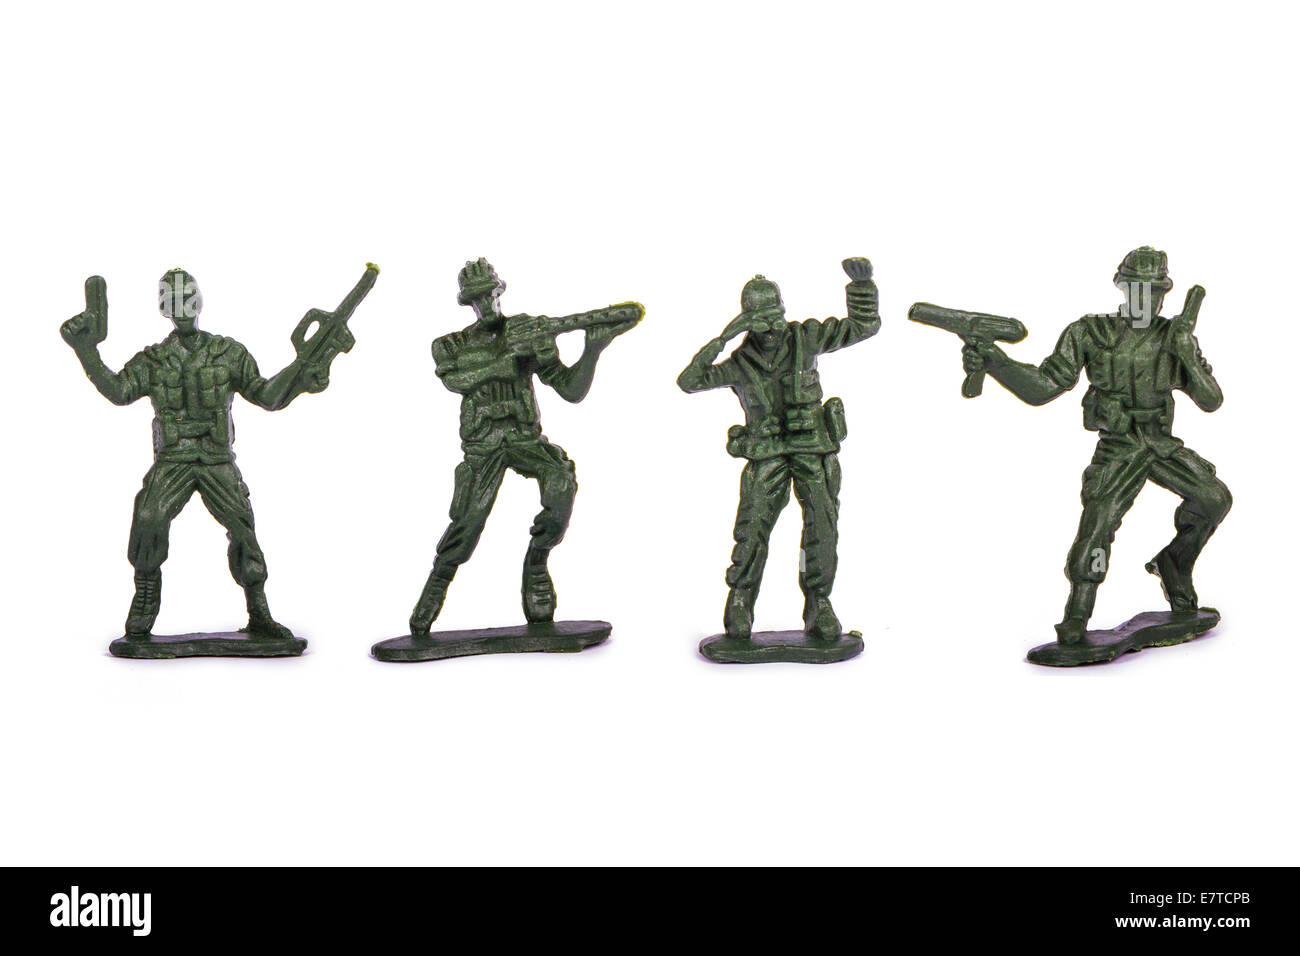 Group of miniature toy soldiers, isolated on white background. Stock Photo